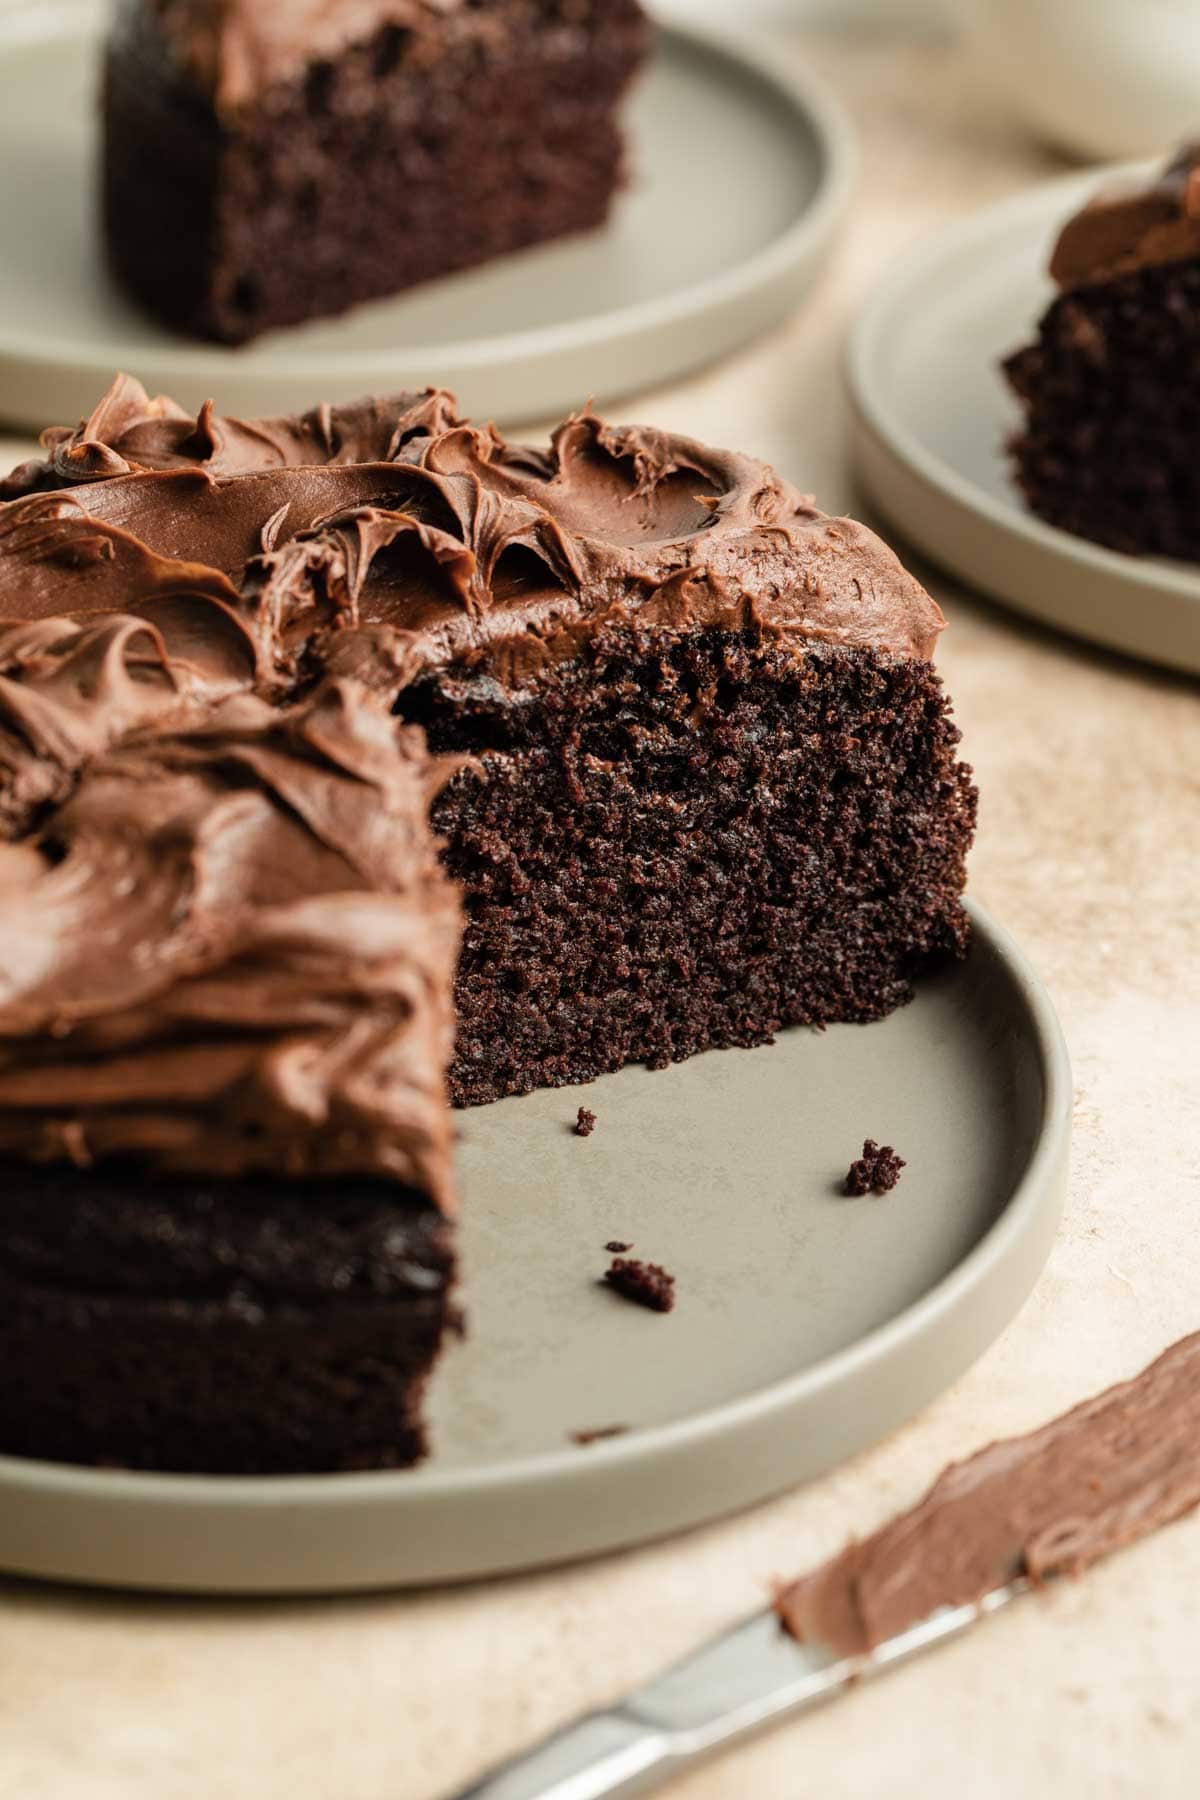 Side view of a cut chocolate cake, exposing the inside moist and soft texture.